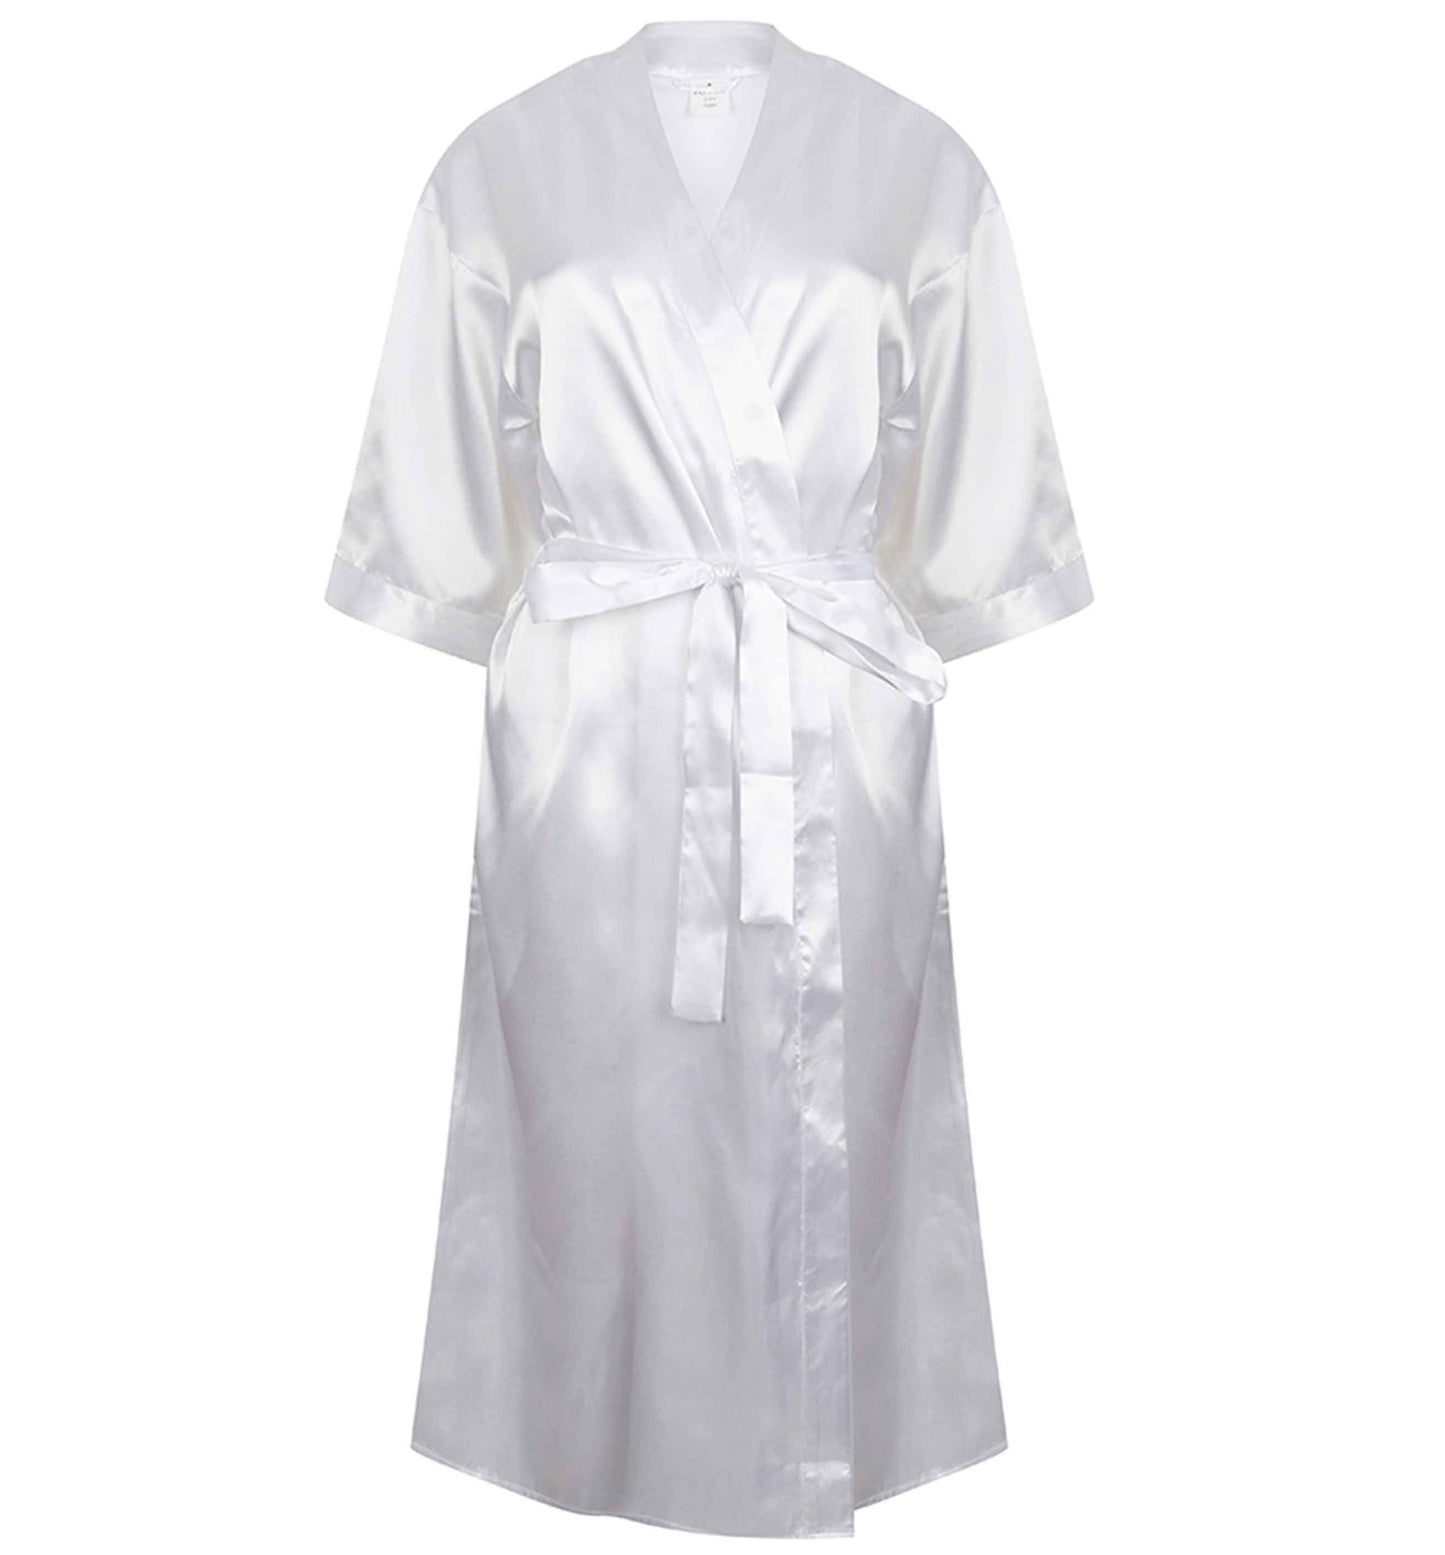 All I want for Christmas is a greyhound | 8-18 | Kimono style satin robe | Ladies dressing gown